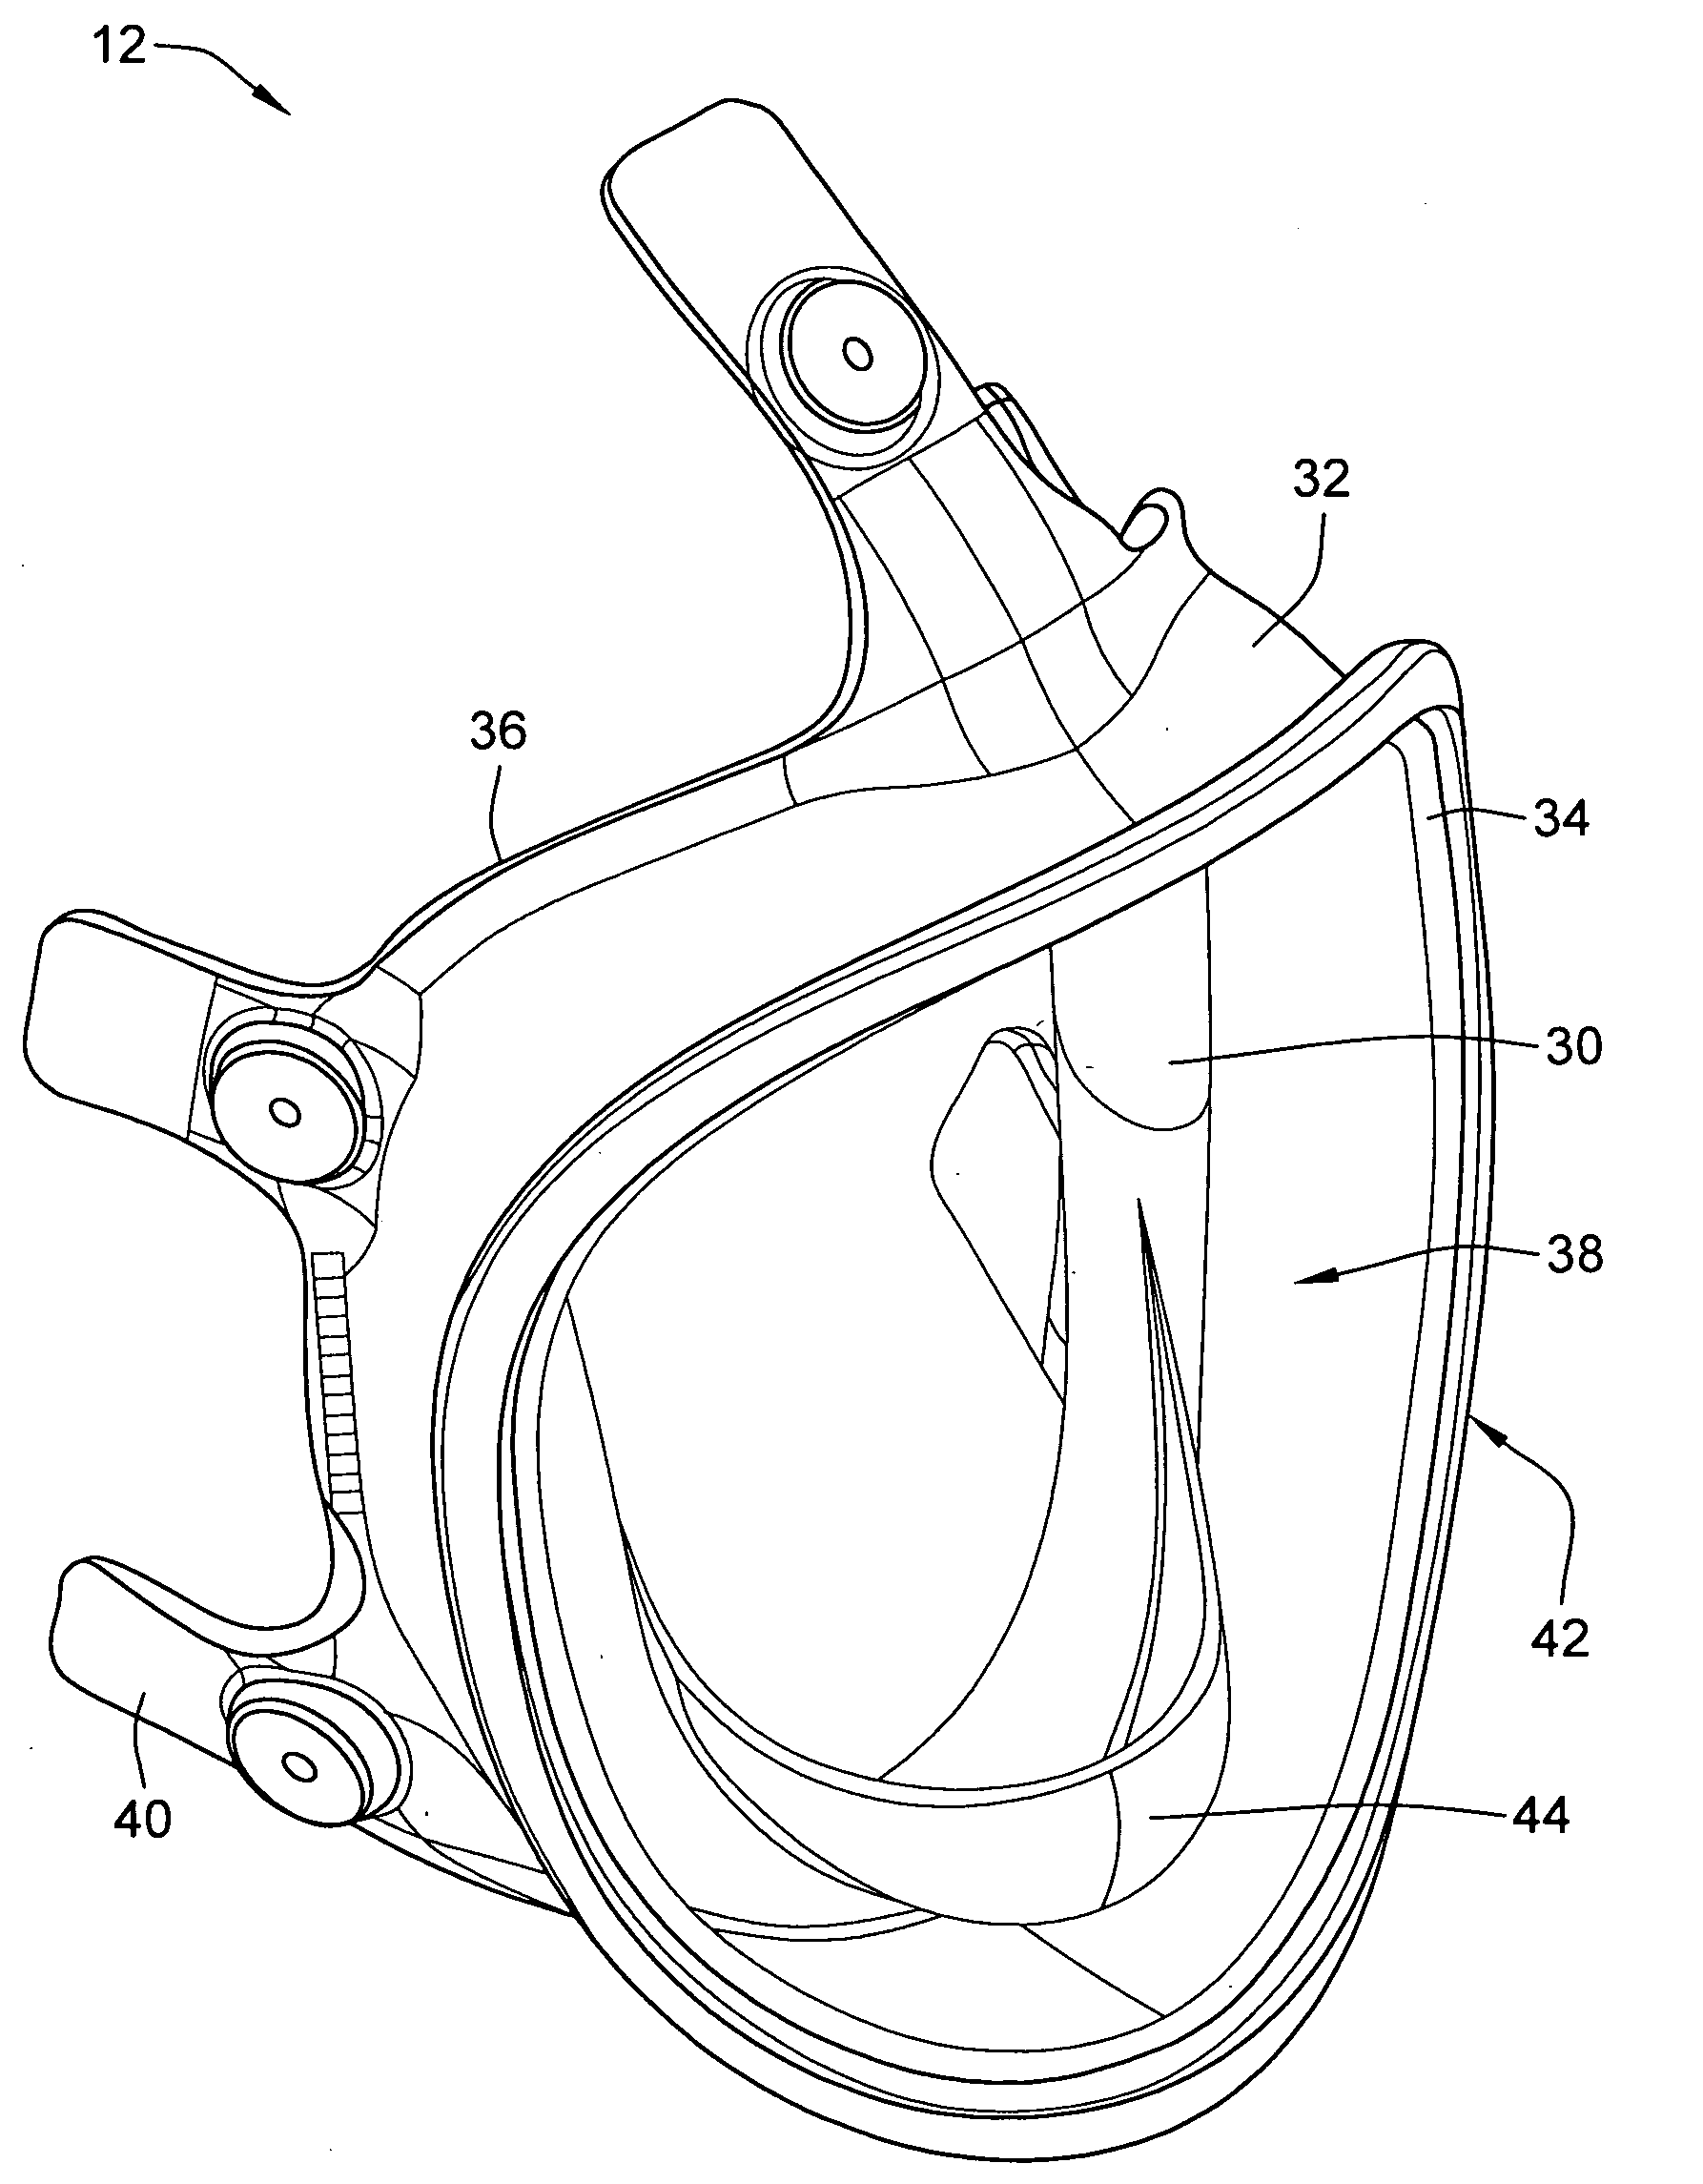 Face seals for respirators and method of manufacturing respirators